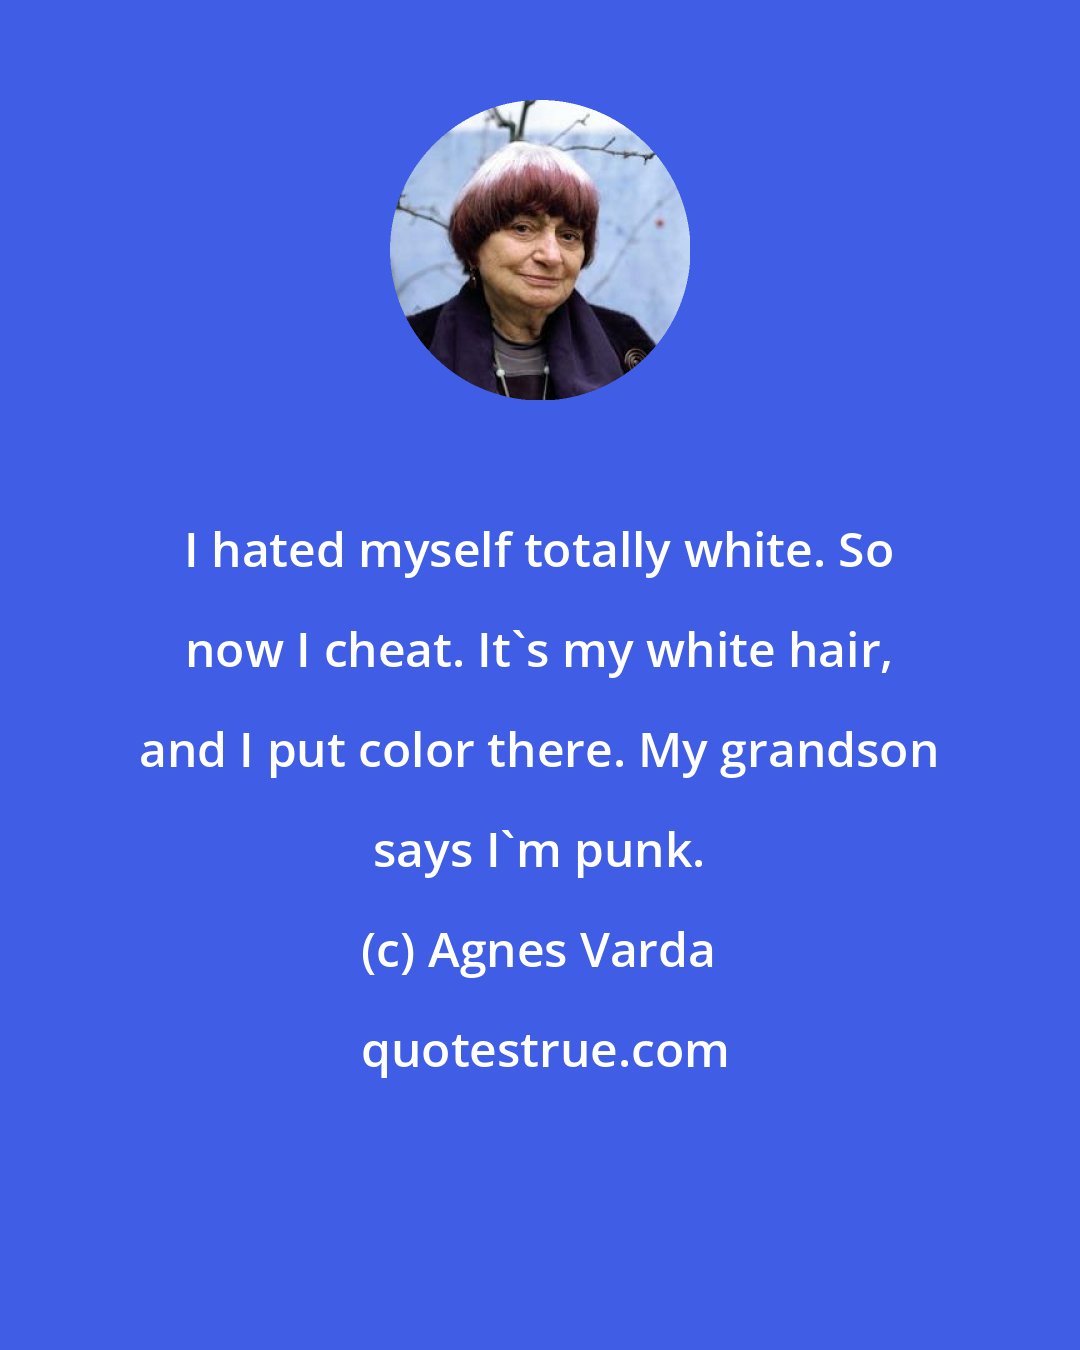 Agnes Varda: I hated myself totally white. So now I cheat. It's my white hair, and I put color there. My grandson says I'm punk.